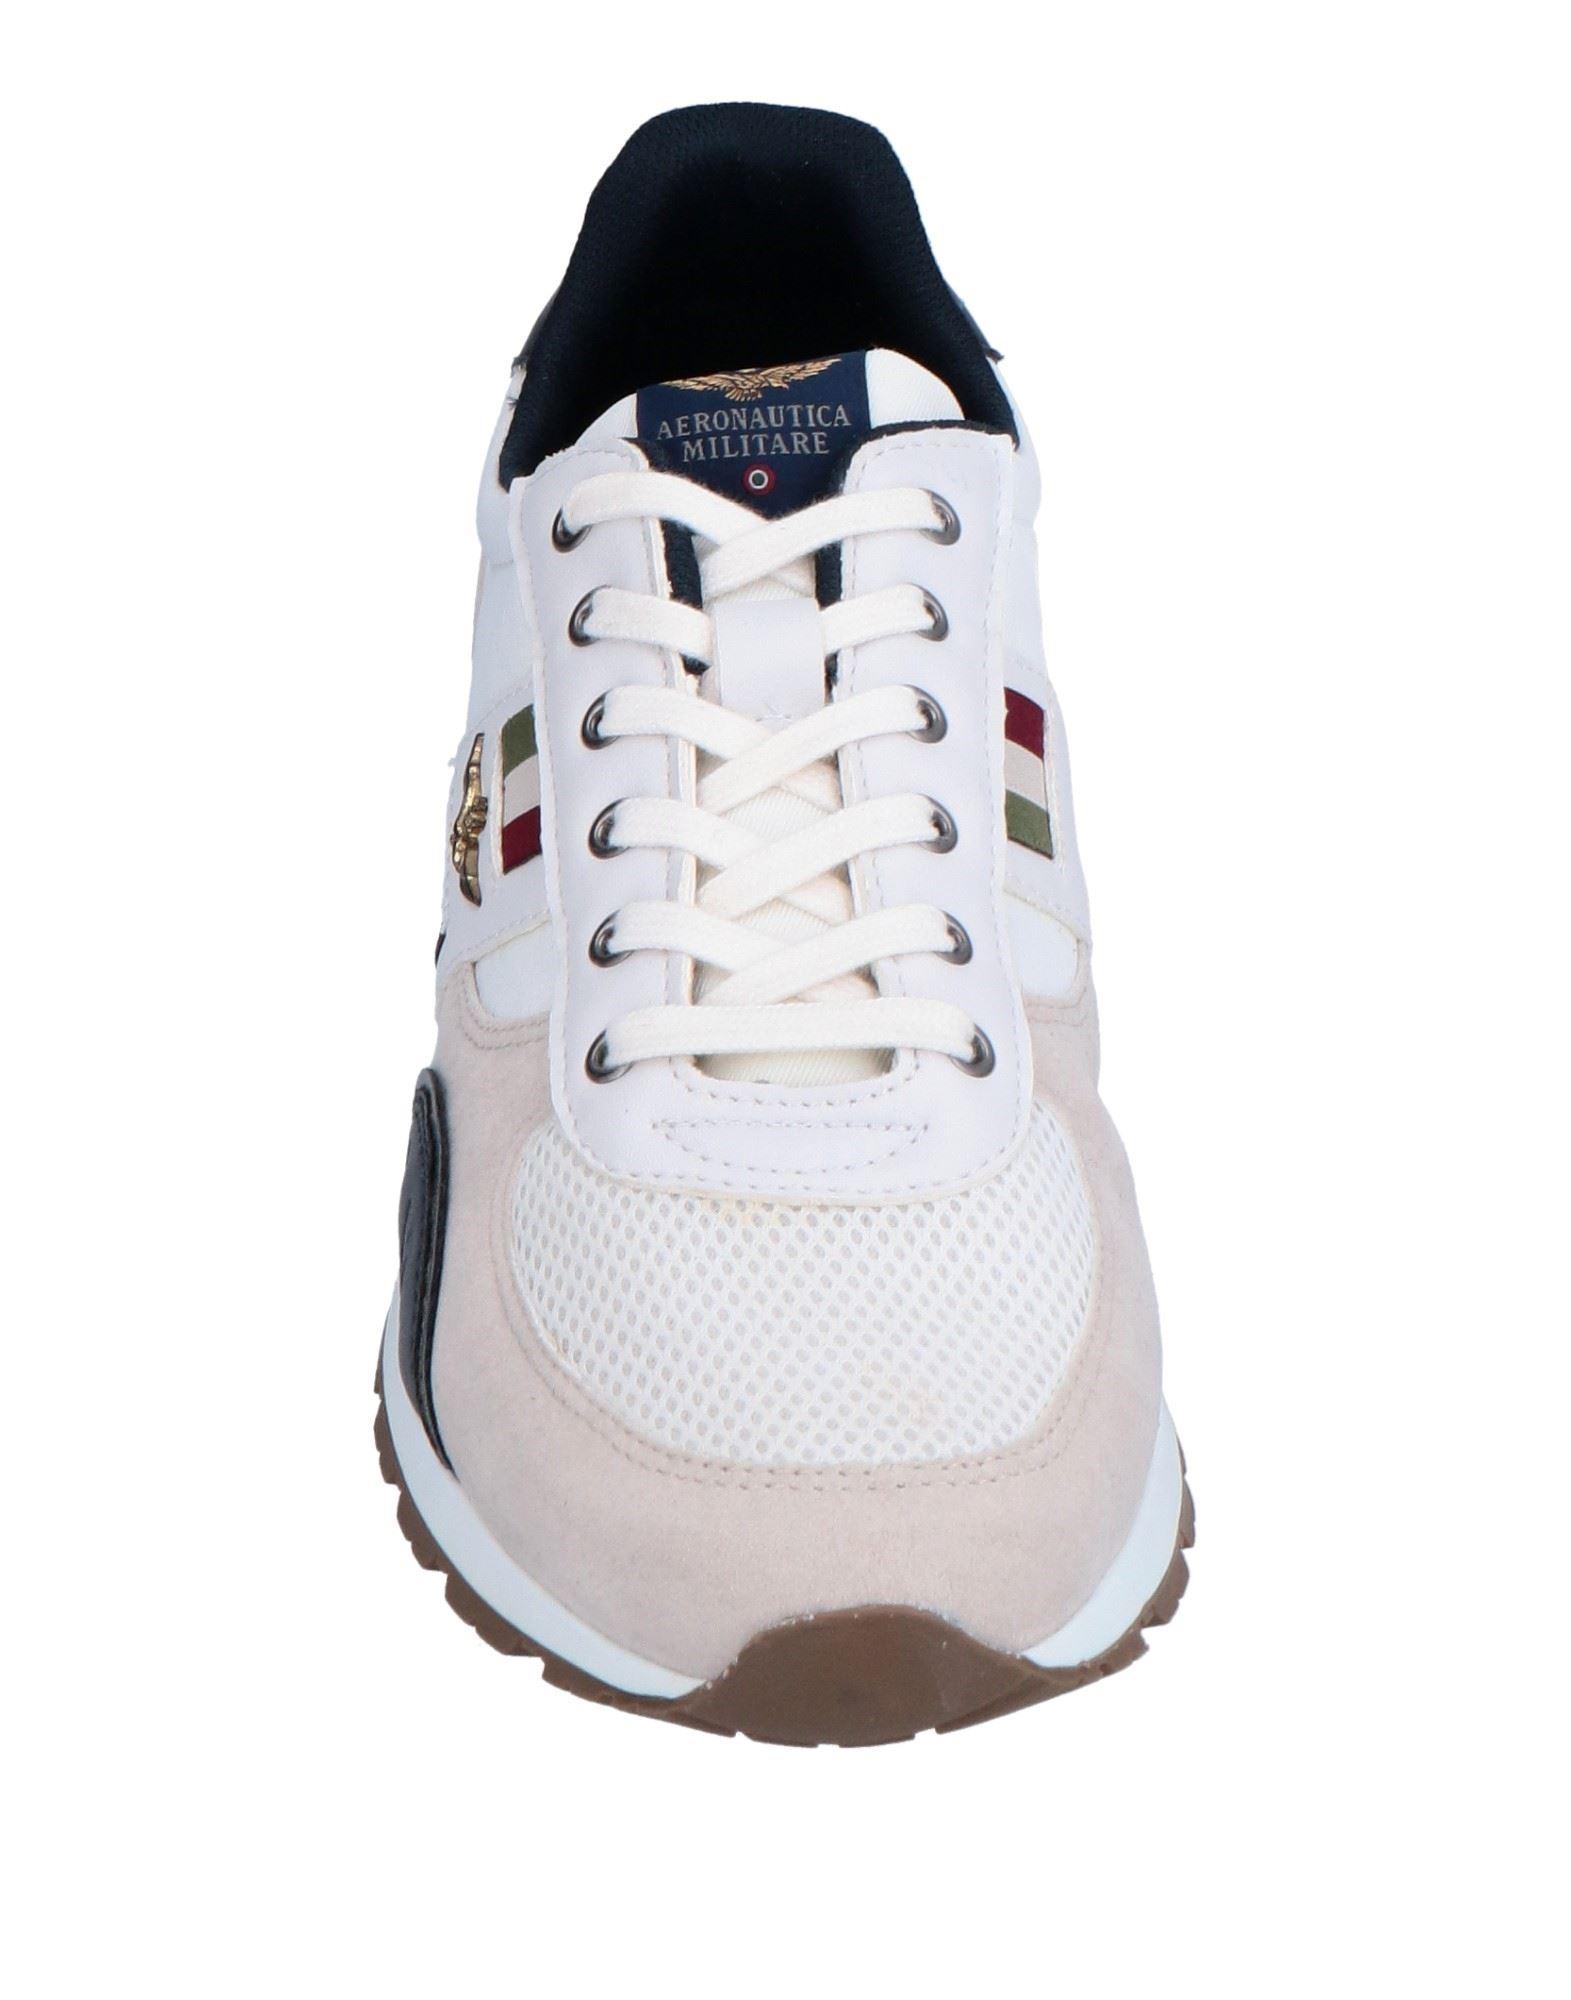 Aeronautica Militare Leather Sneakers in Ivory (White) | Lyst